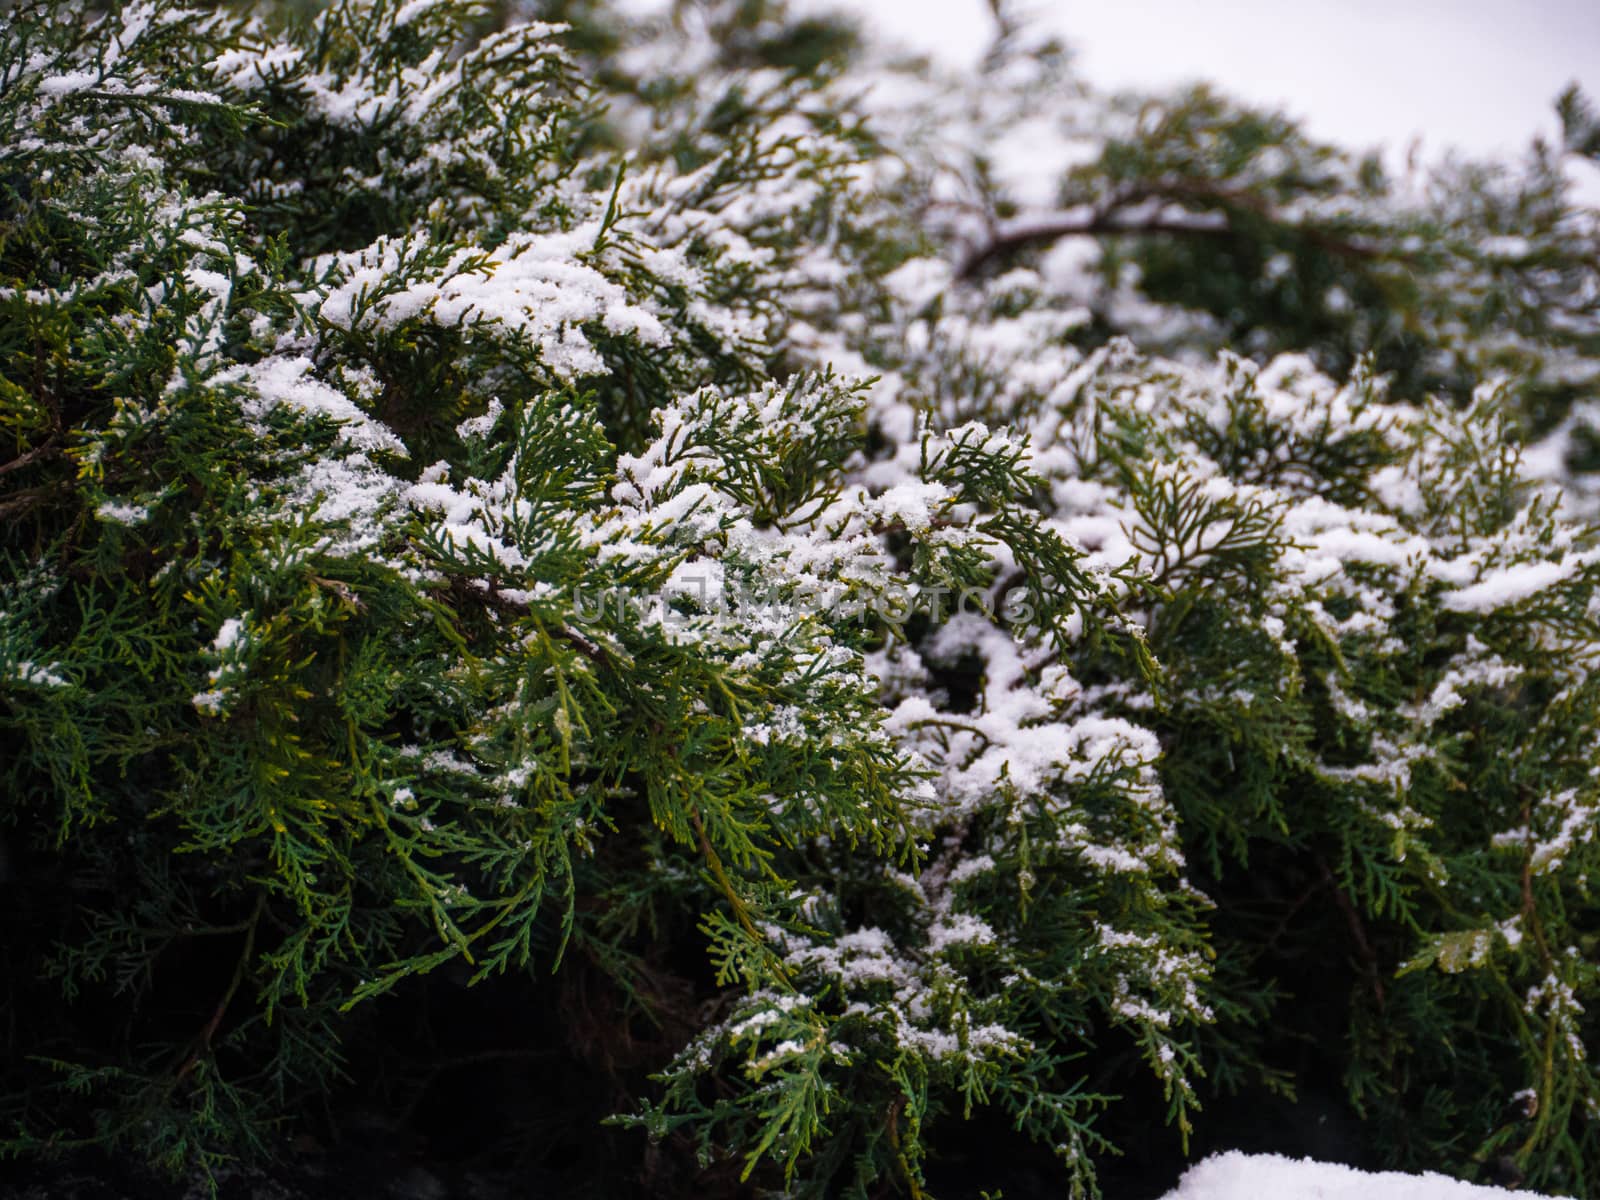 Green conifer pine tree branch with snow